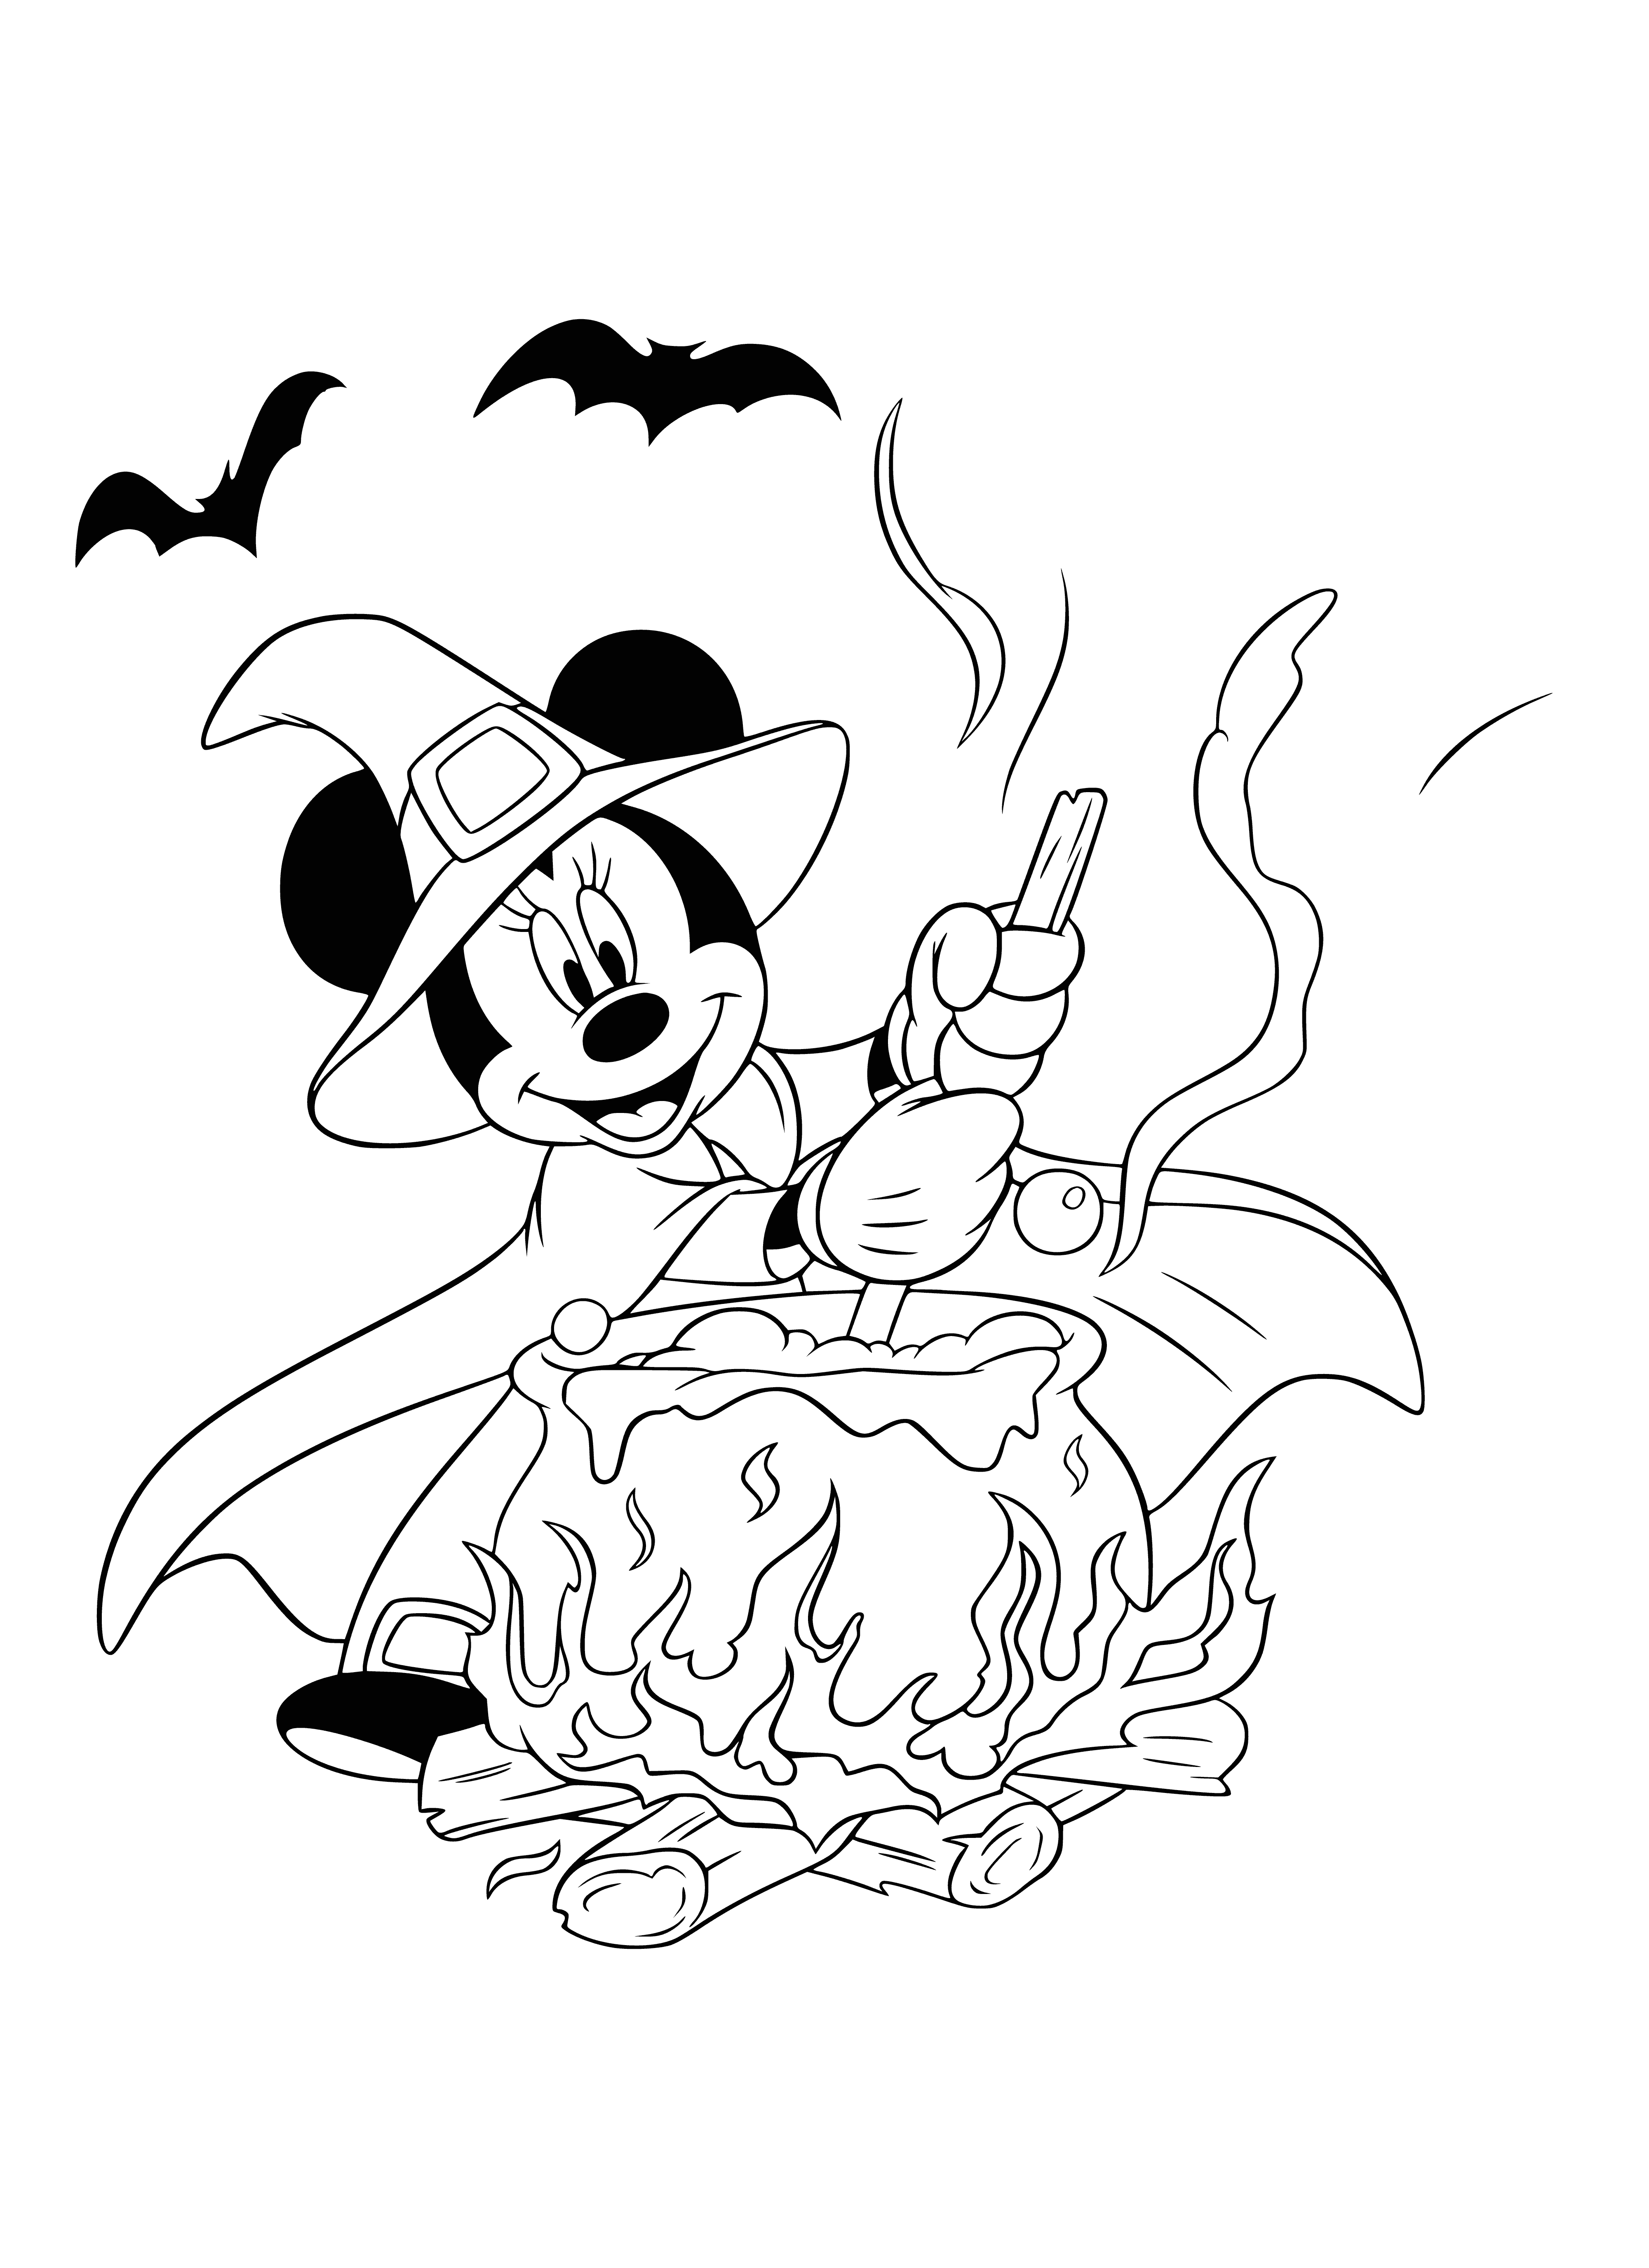 coloring page: Minnie stirs a magical green potion in a black cauldron while wearing a purple dress, lit by a candle.